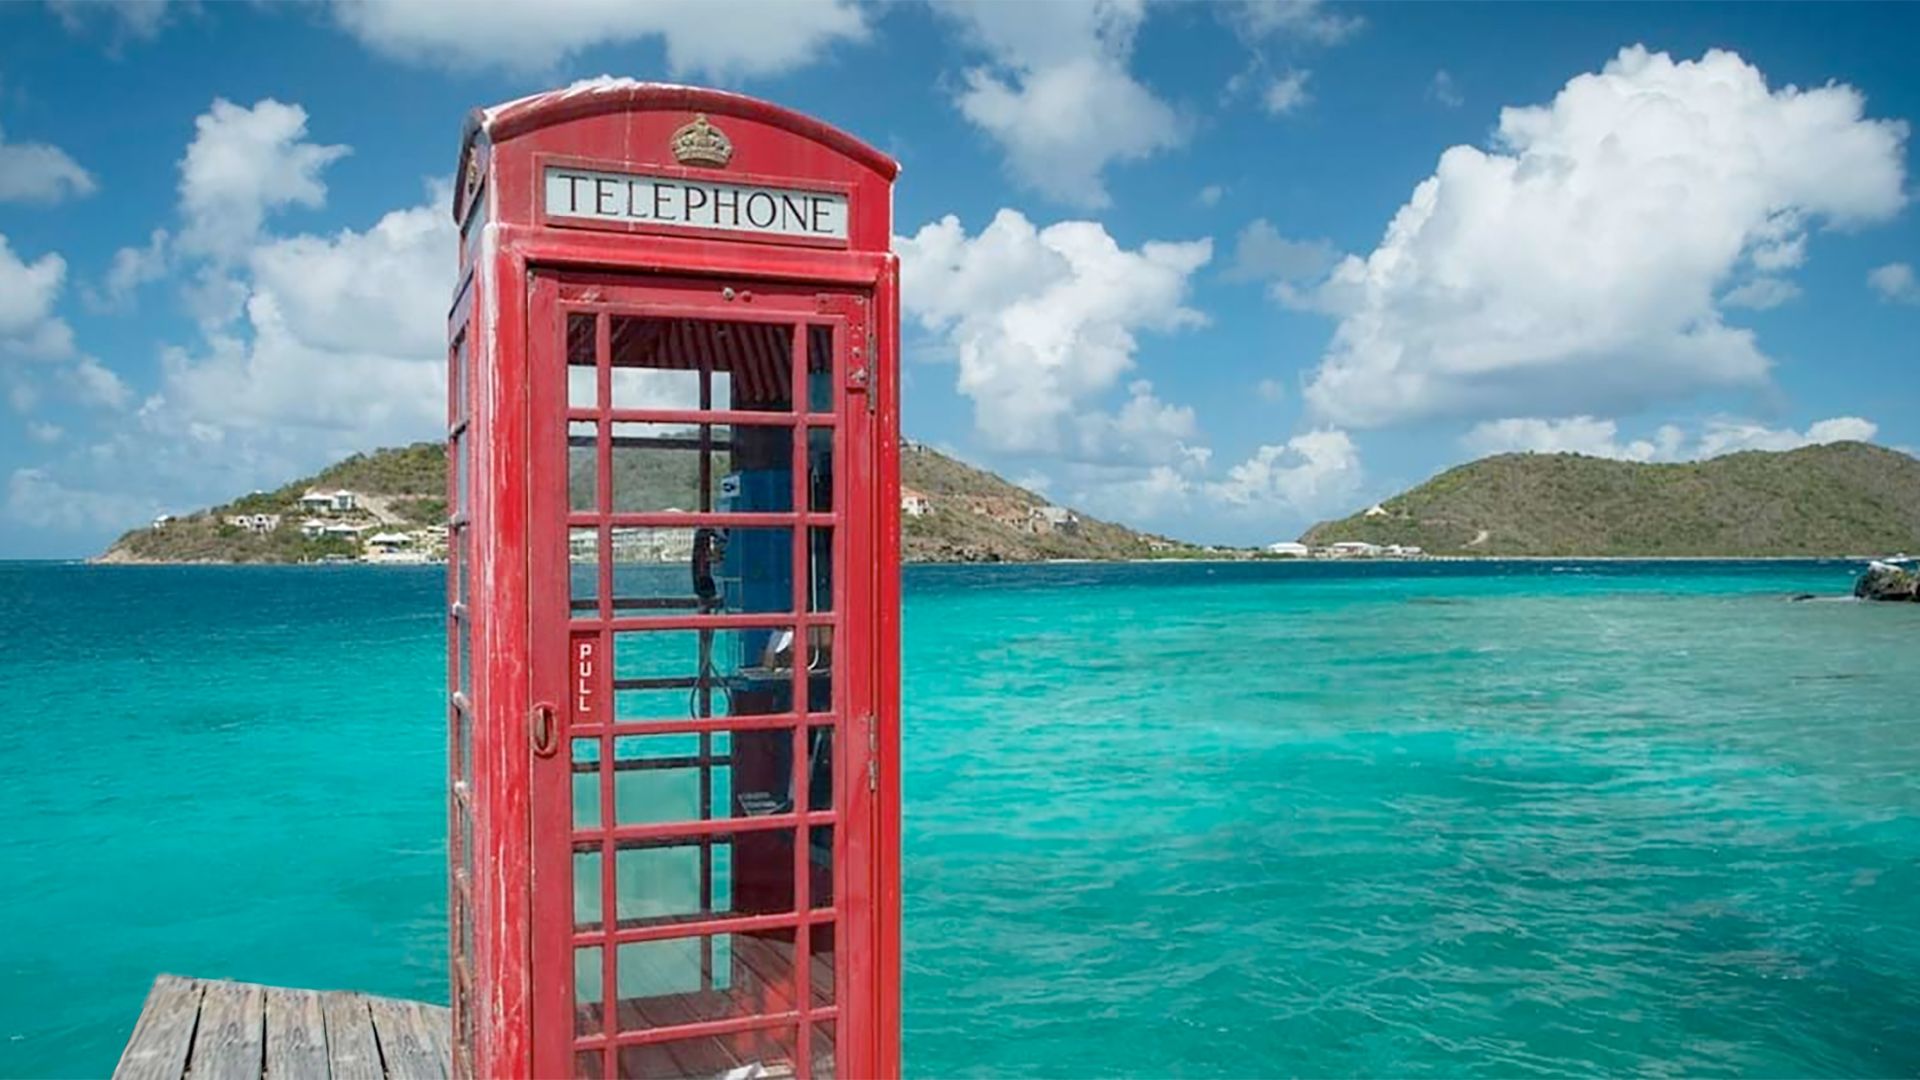 A Red Telephone Booth On A Dock Over Water